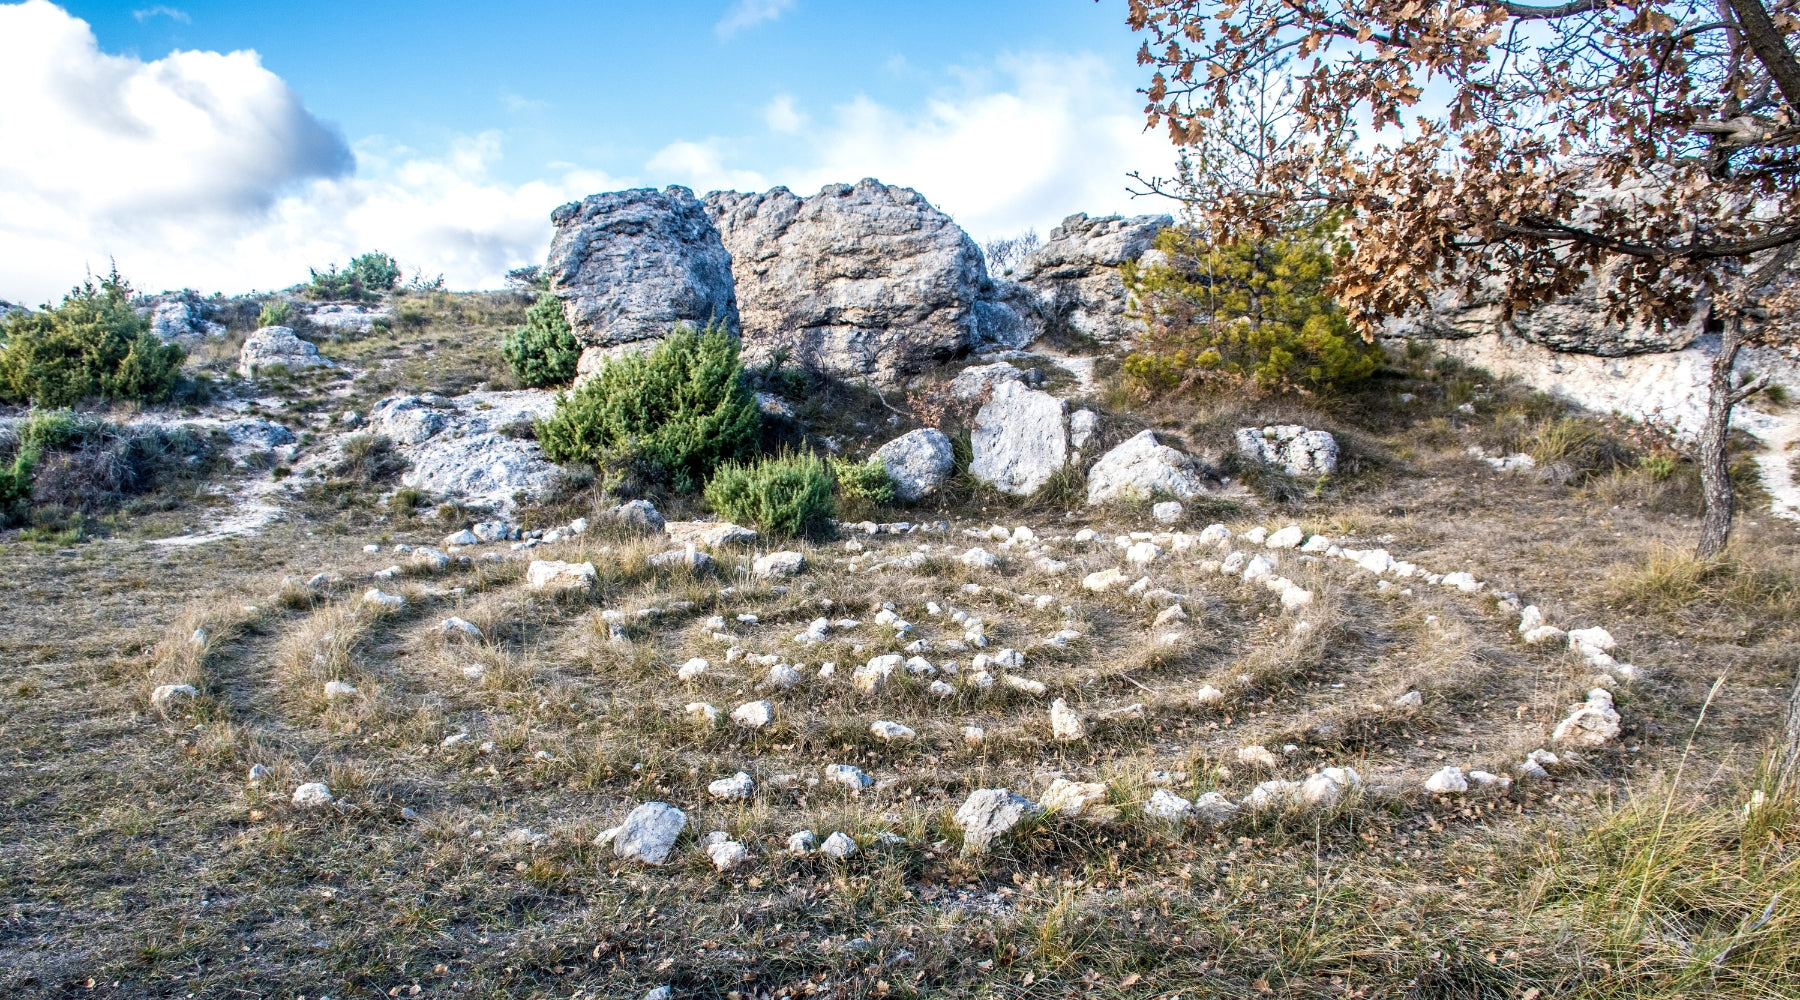 Neo-paganism, stone circles hold significant spiritual and ritualistic value